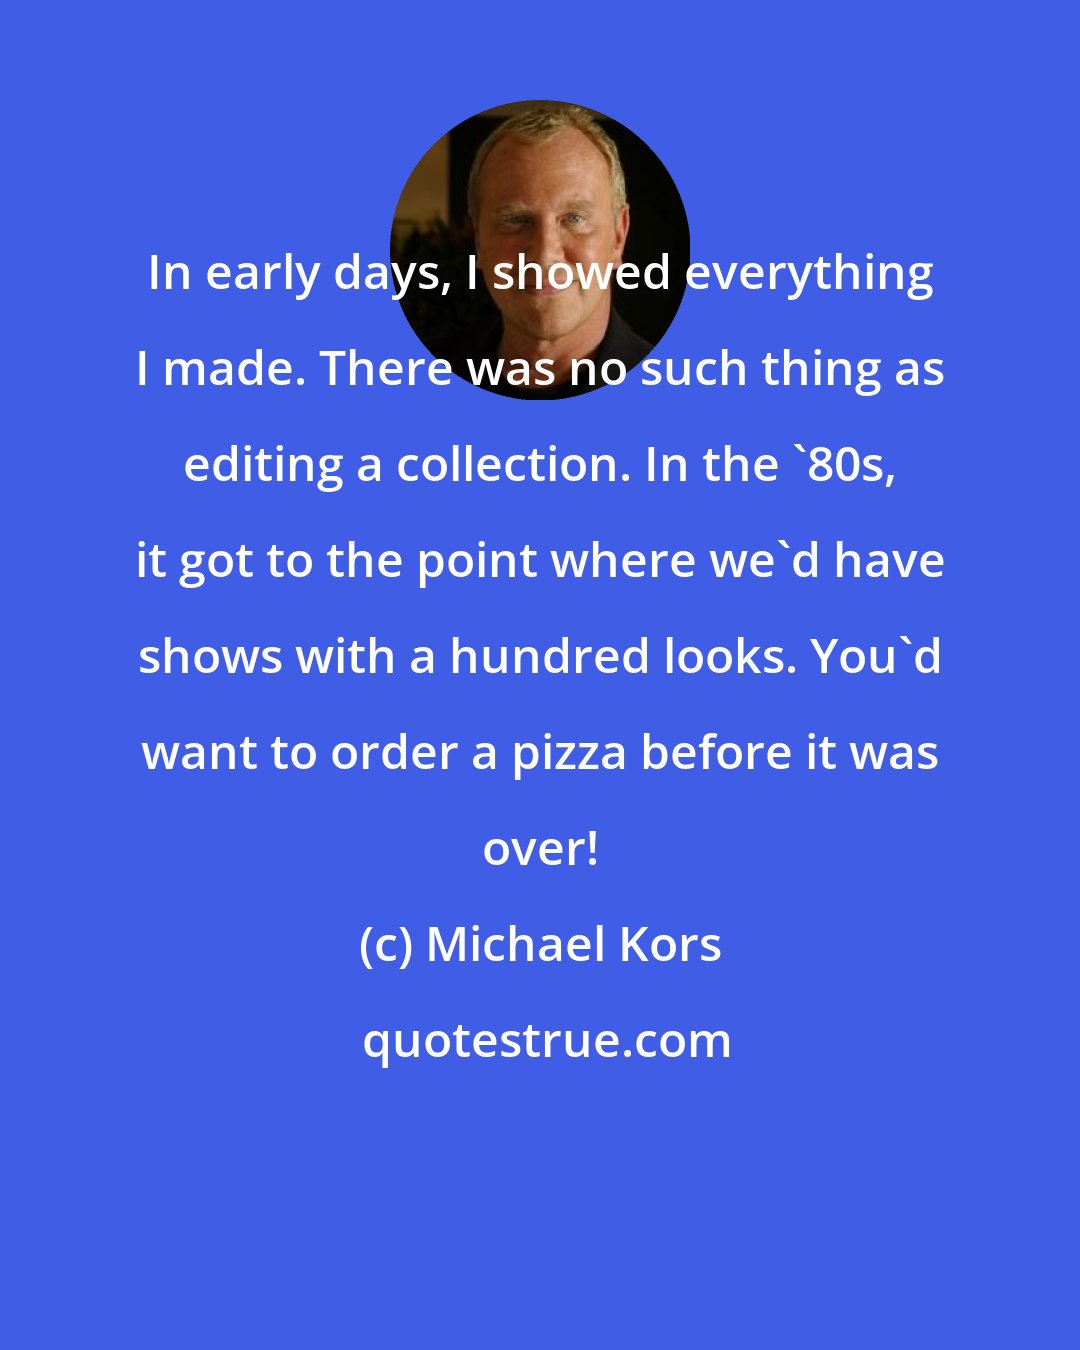 Michael Kors: In early days, I showed everything I made. There was no such thing as editing a collection. In the '80s, it got to the point where we'd have shows with a hundred looks. You'd want to order a pizza before it was over!